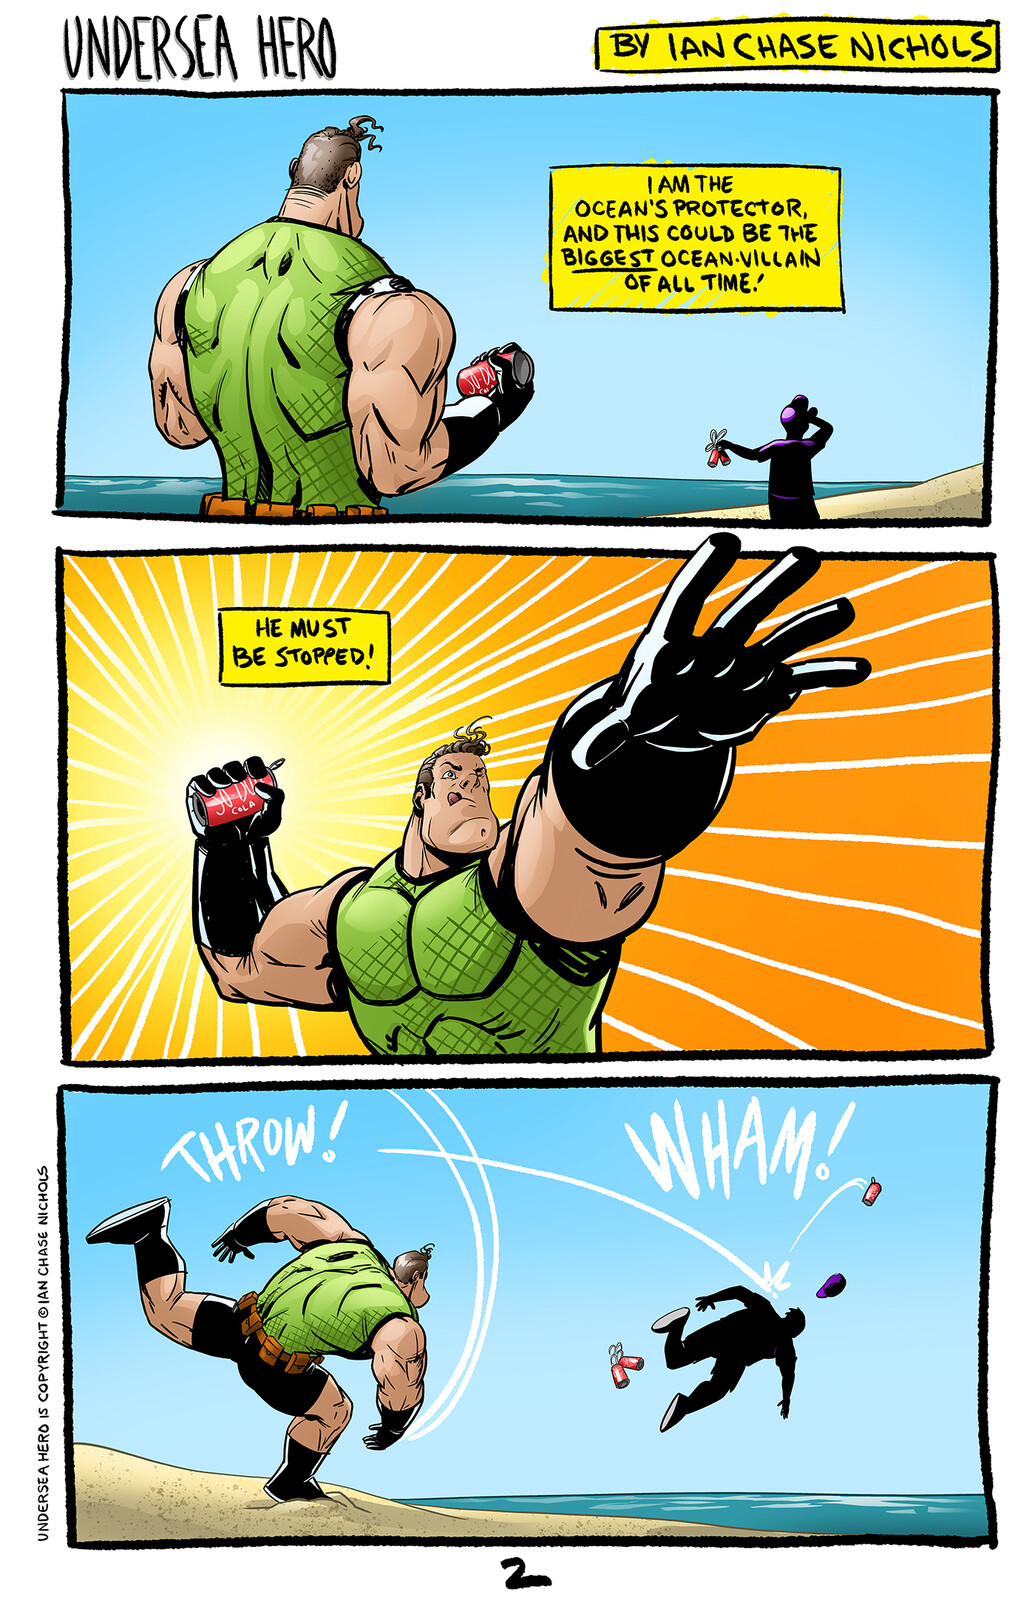 UNDERSEA HERO comic strip page two.

UNDERSEA HERO and all Related Characters are Copyright © and Trademark TM 2022 Ian Chase Nichols. All Rights Reserved.
